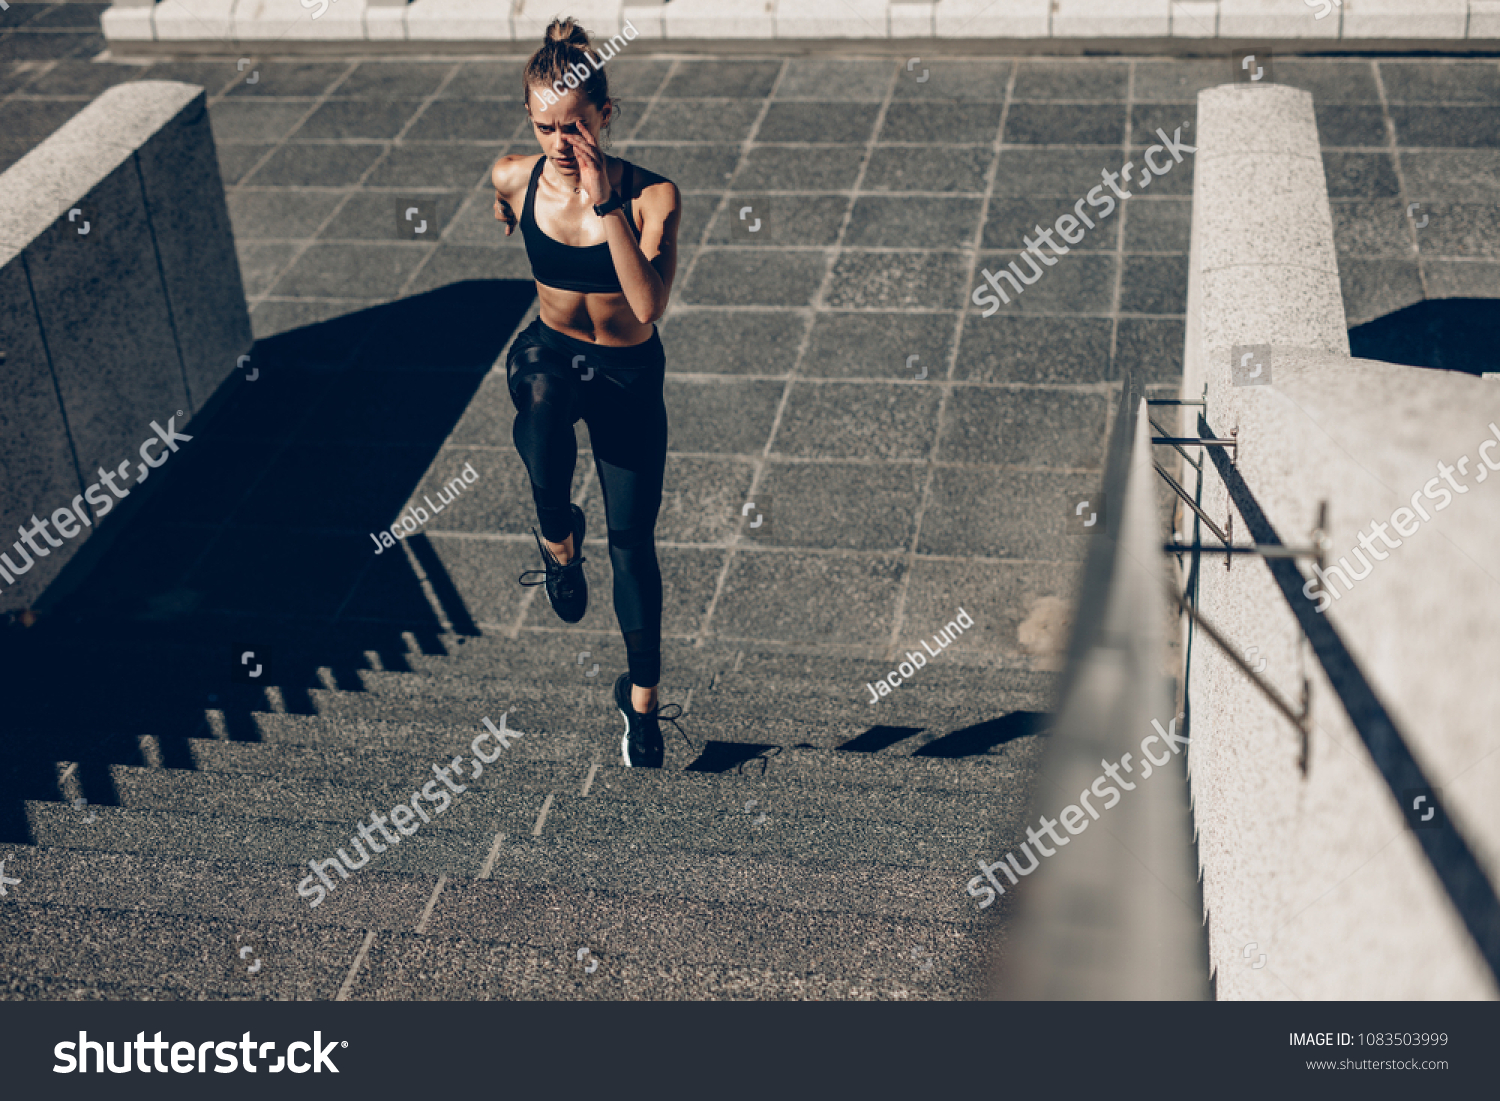 Fit sportswoman running up the steps. Female runner exercising on staircase outdoors. #1083503999